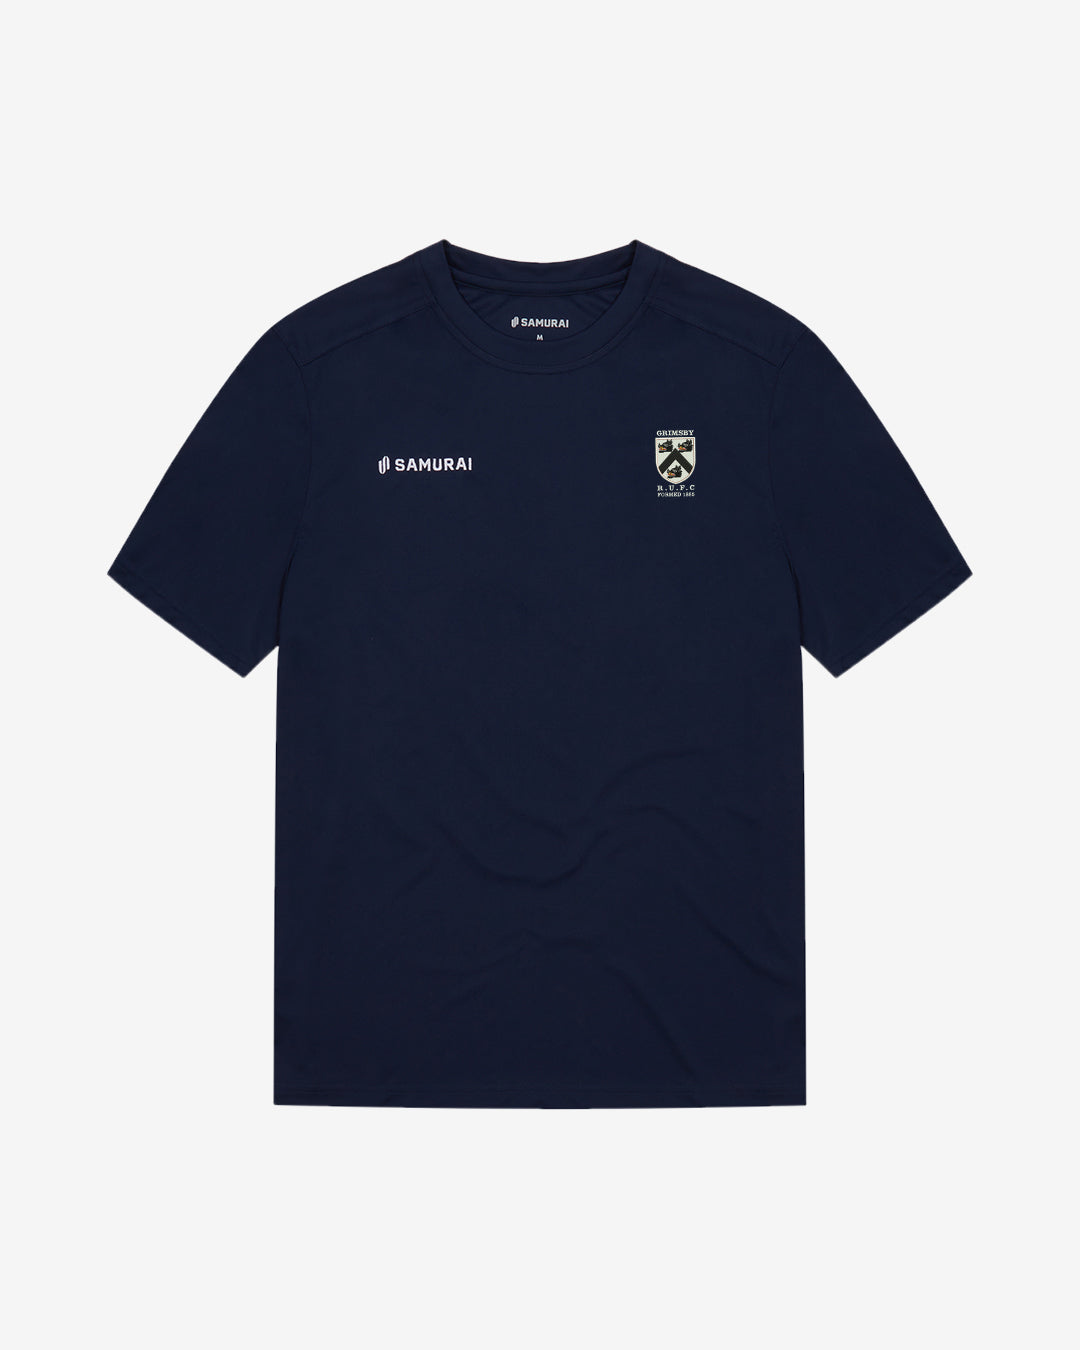 Grimsby RUFC - EP:0110 - Performance Tee 2.1 - Navy